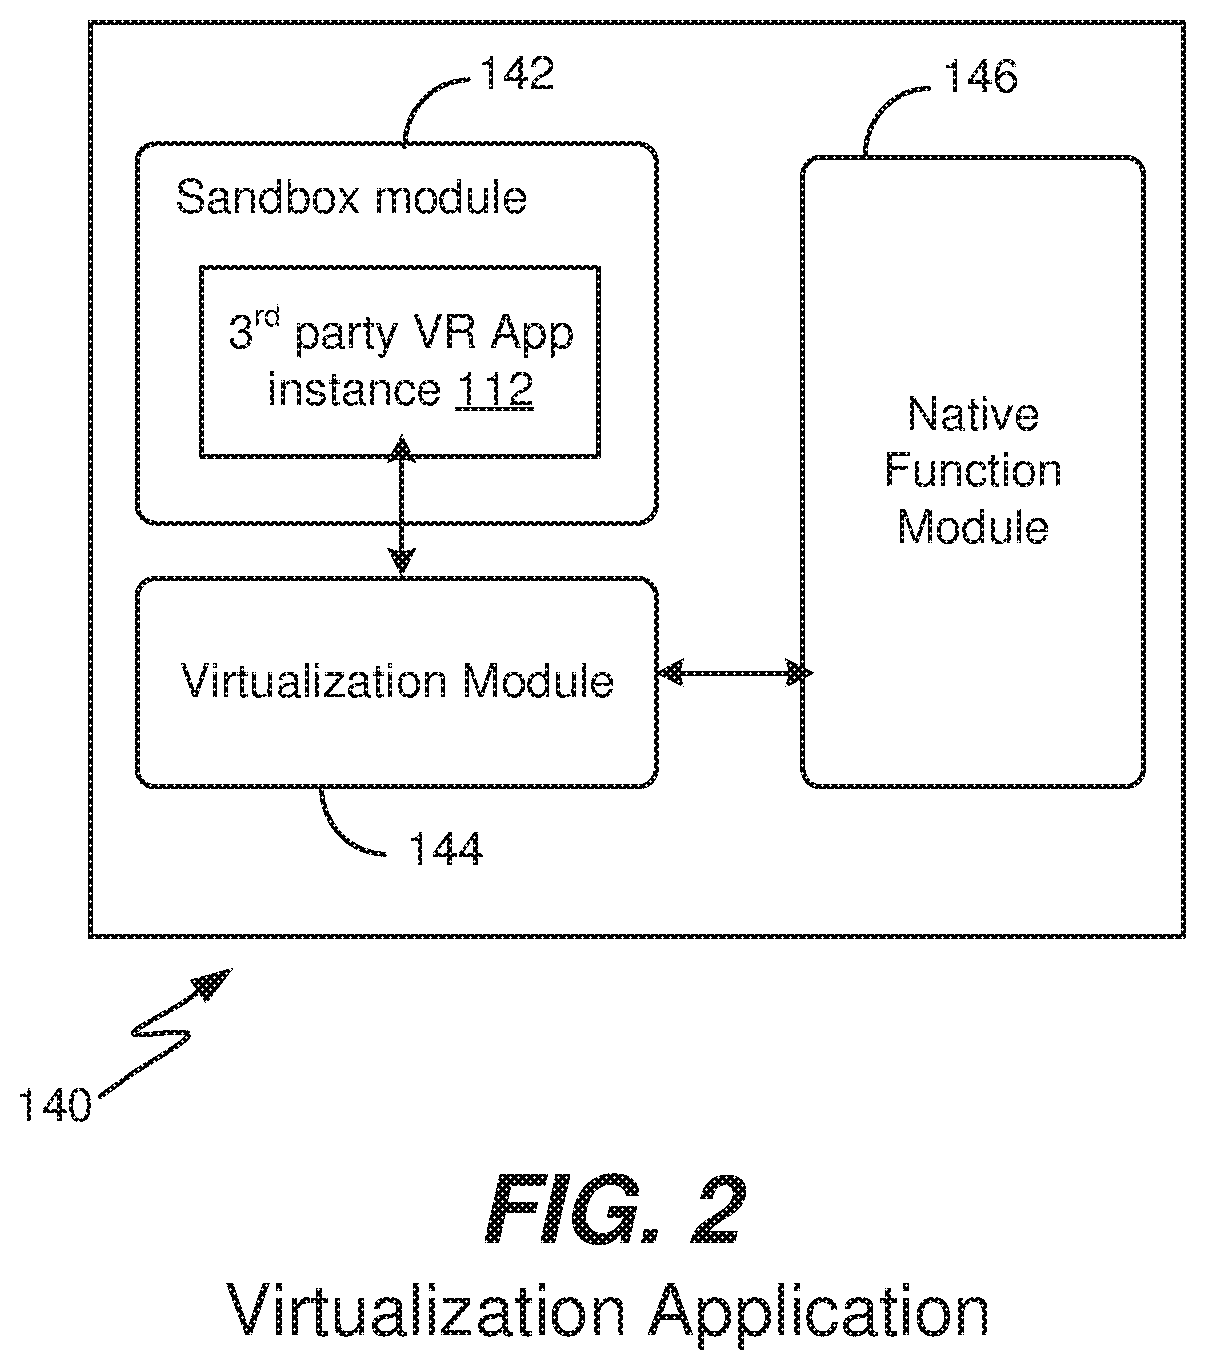 Virtualization of smartphone functions in a virtual reality application